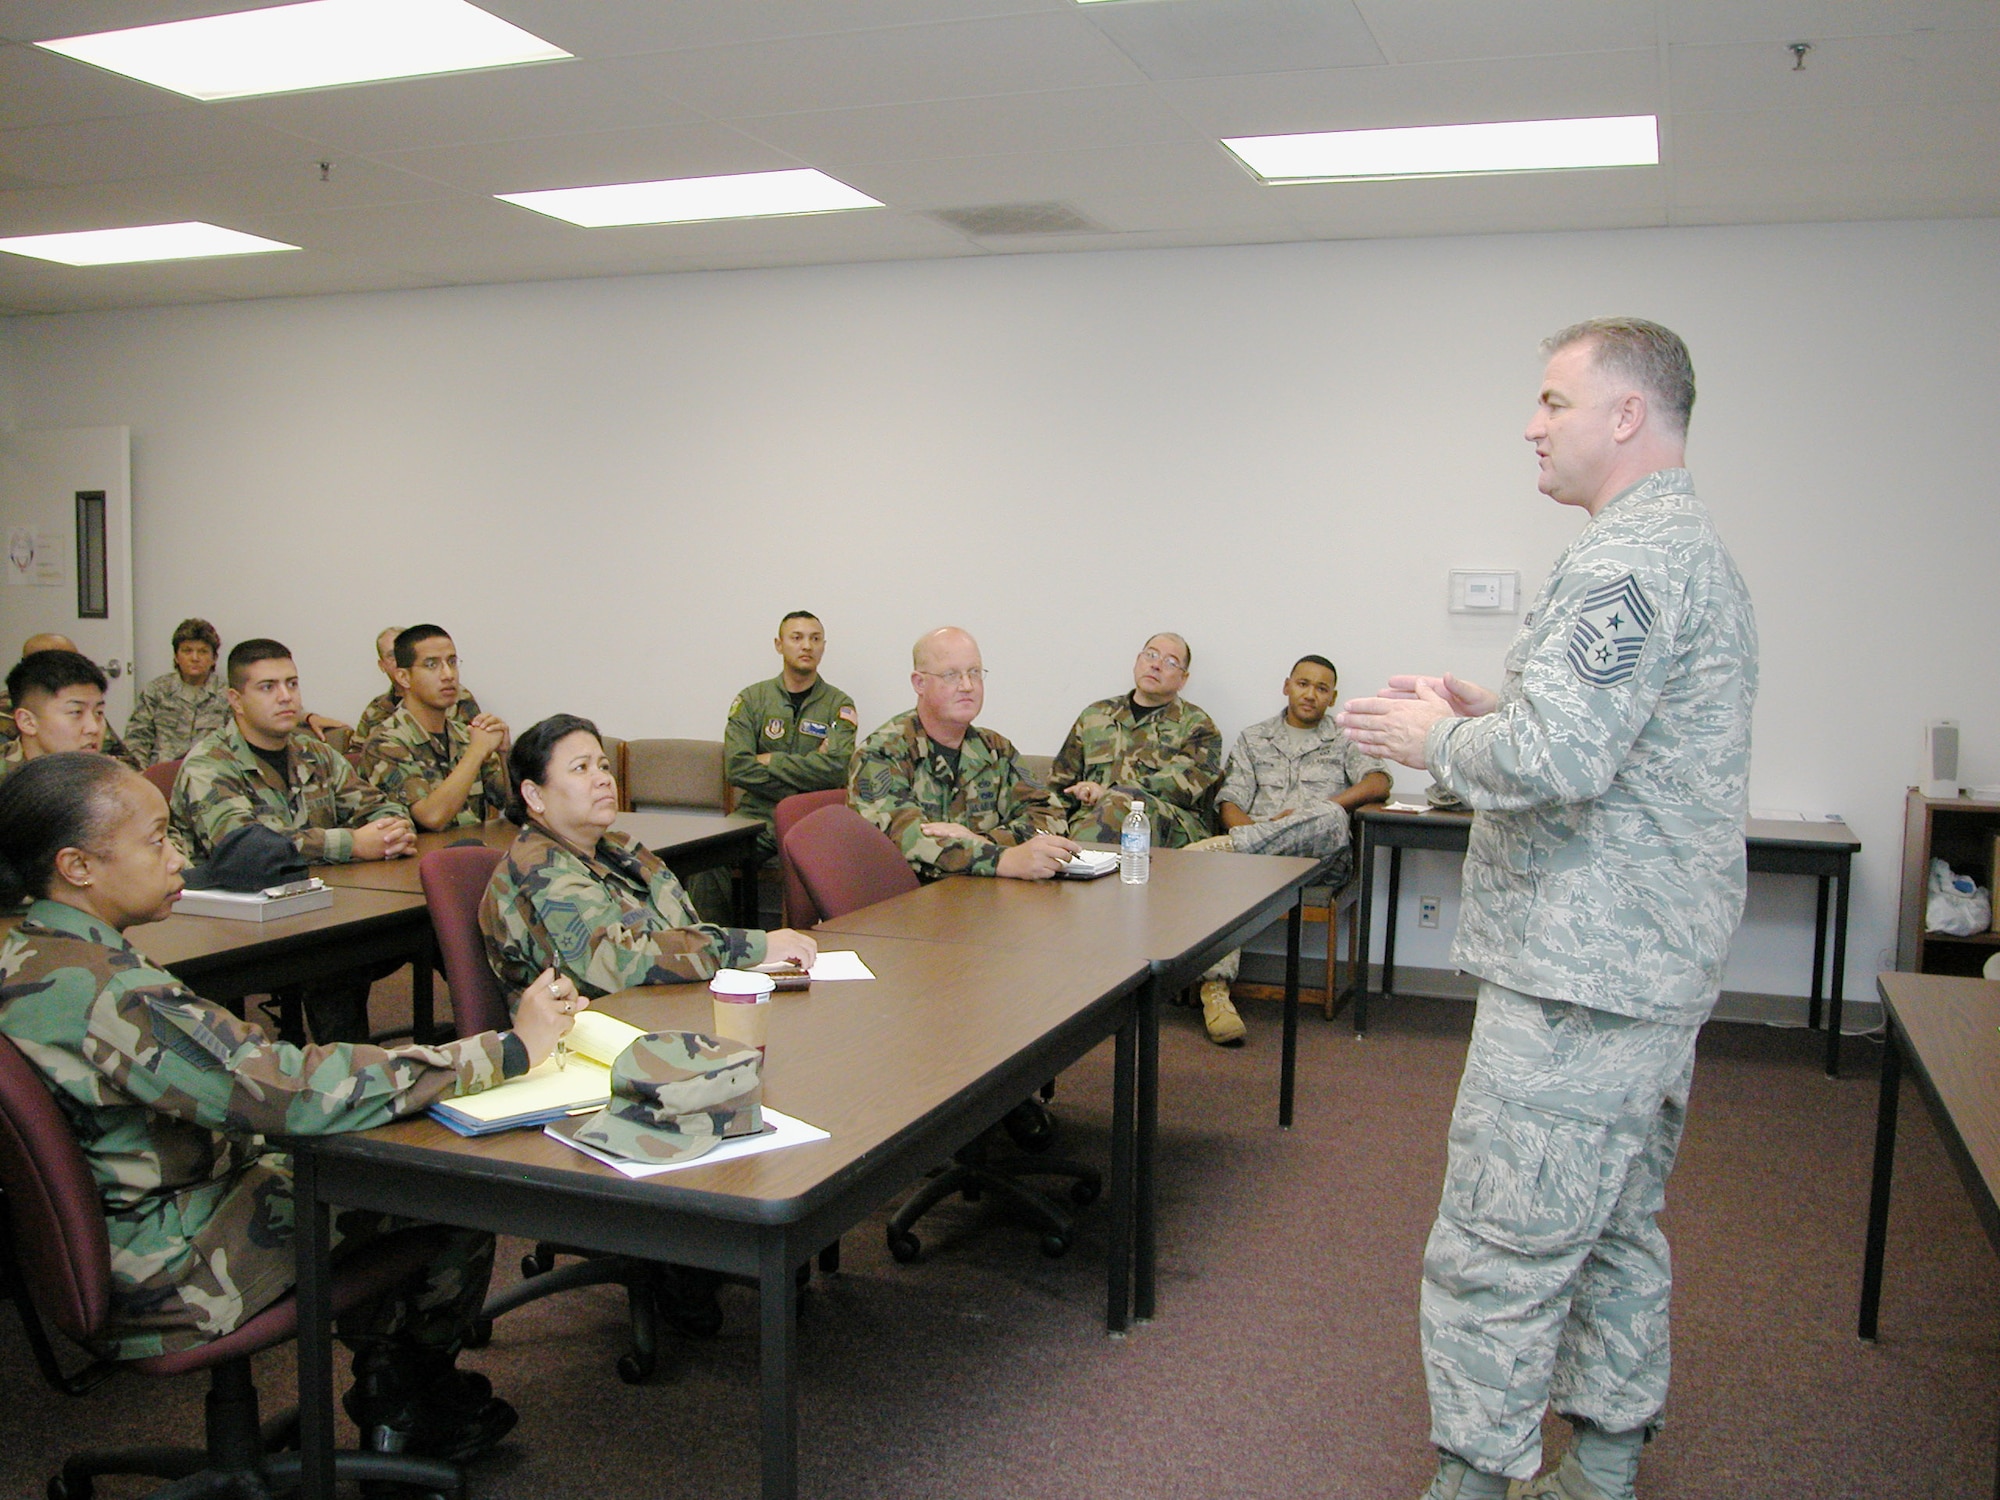 Air Force Reserve Command’s highest-ranking enlisted member, Chief Master Sgt. Troy McIntosh, speaks to a Rising Six meeting at the Education and Training Center, Sunday, during his March ARB visit. During the visit, he signed a mock-up of the new Rising Six logo. The chief said he was impressed by what he saw here and heard about what the Rising Six and the Top 3 were doing to keep communication lines open between leaders and junior enlisted members . An enlisted call was held in the Cultural Center where the Chief discussed a couple of the new priorities: partnering with the joint and coalition teams to win today’s fight, and developing and caring for Airmen and their families. Chief McIntosh also discussed the Air Force Reserve’s greatest claim to fame, balancing family and service to country, and he encouraged everyone to take charge of their own careers. (U.S. Air Force photo by Staff. Sgt. Joe Davidson)